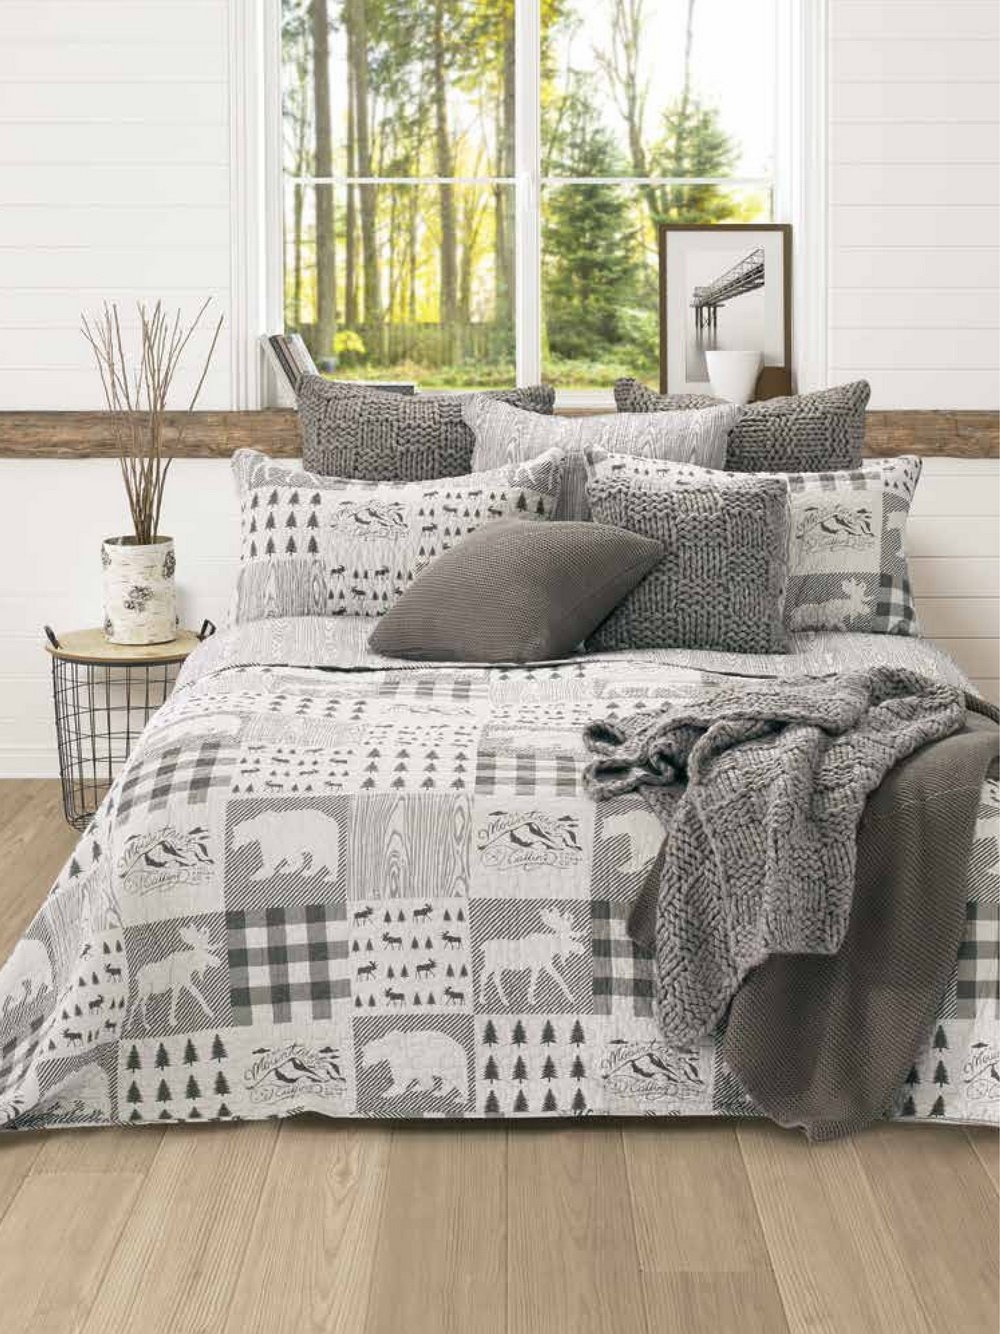 Boreal, a Bedding collection from Brunelli